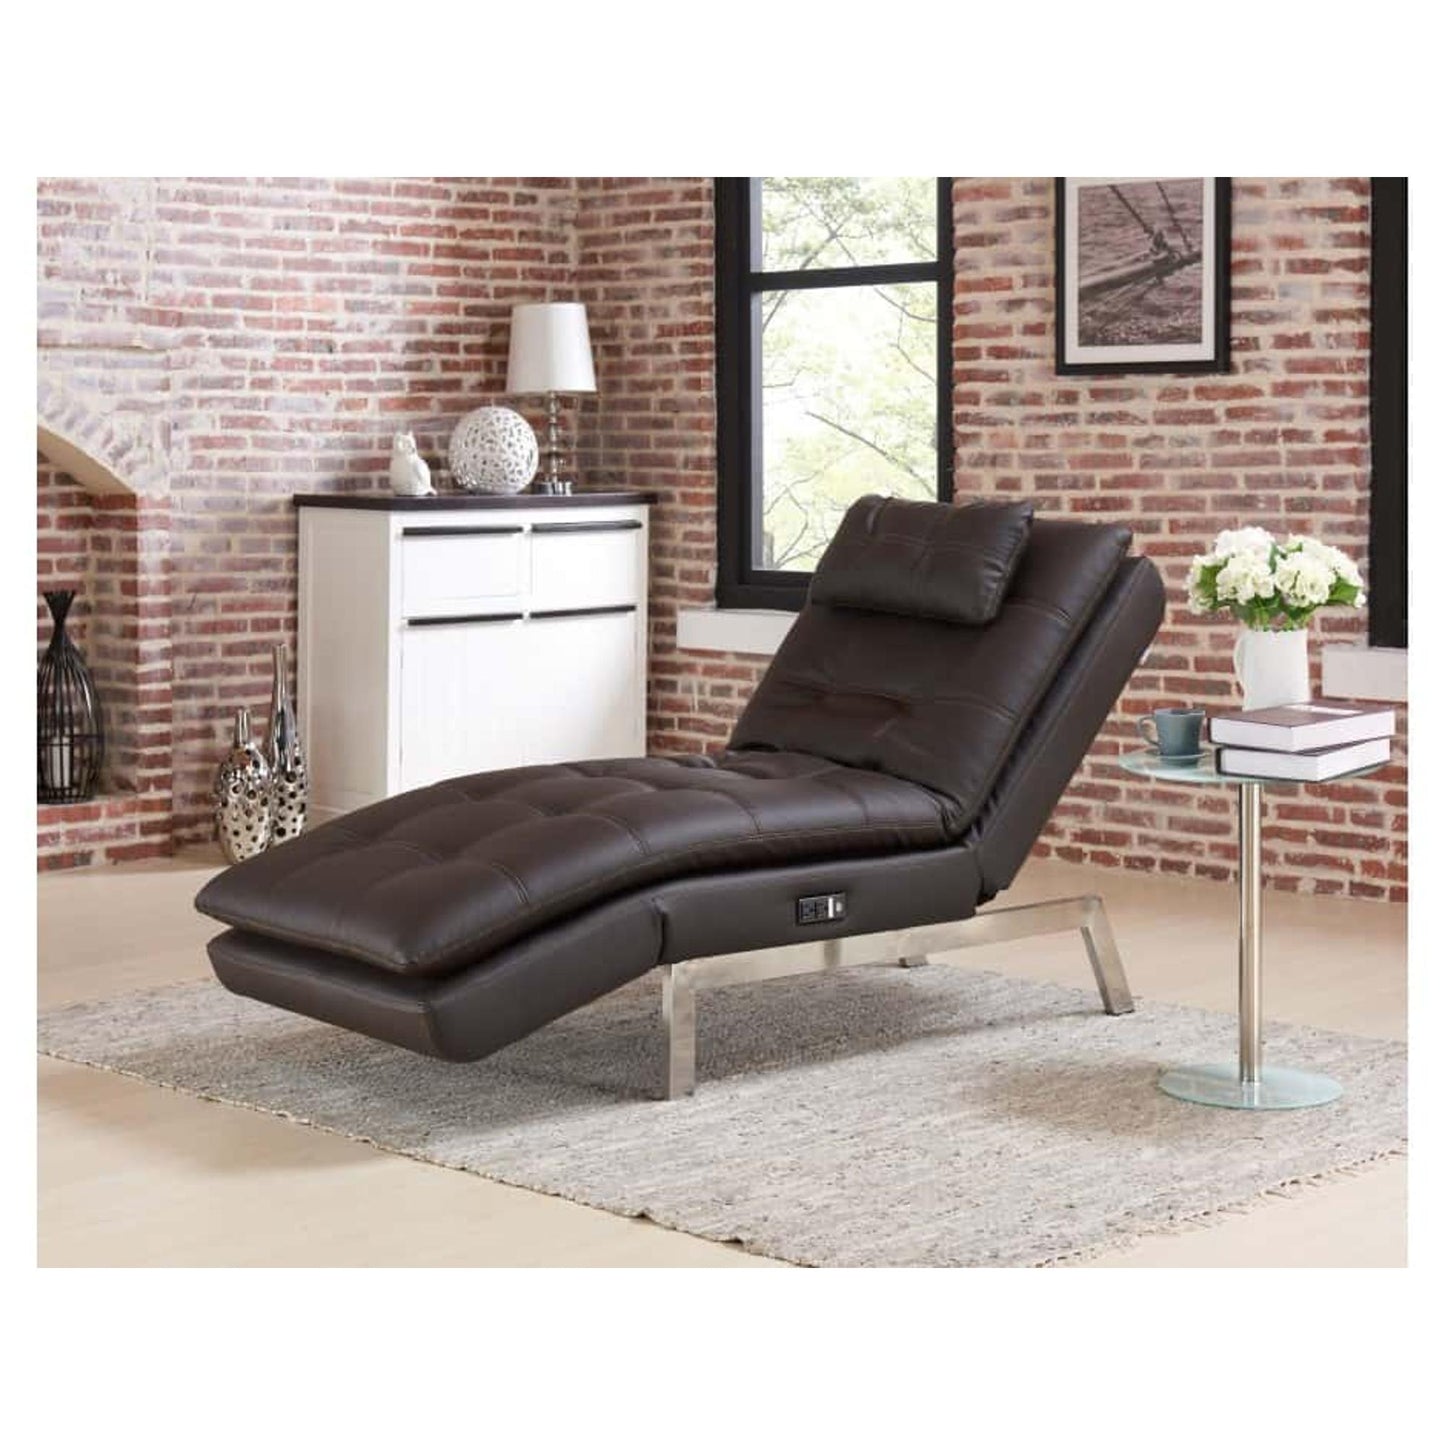 Ares Chaise Lounger in Brown Faux Leather